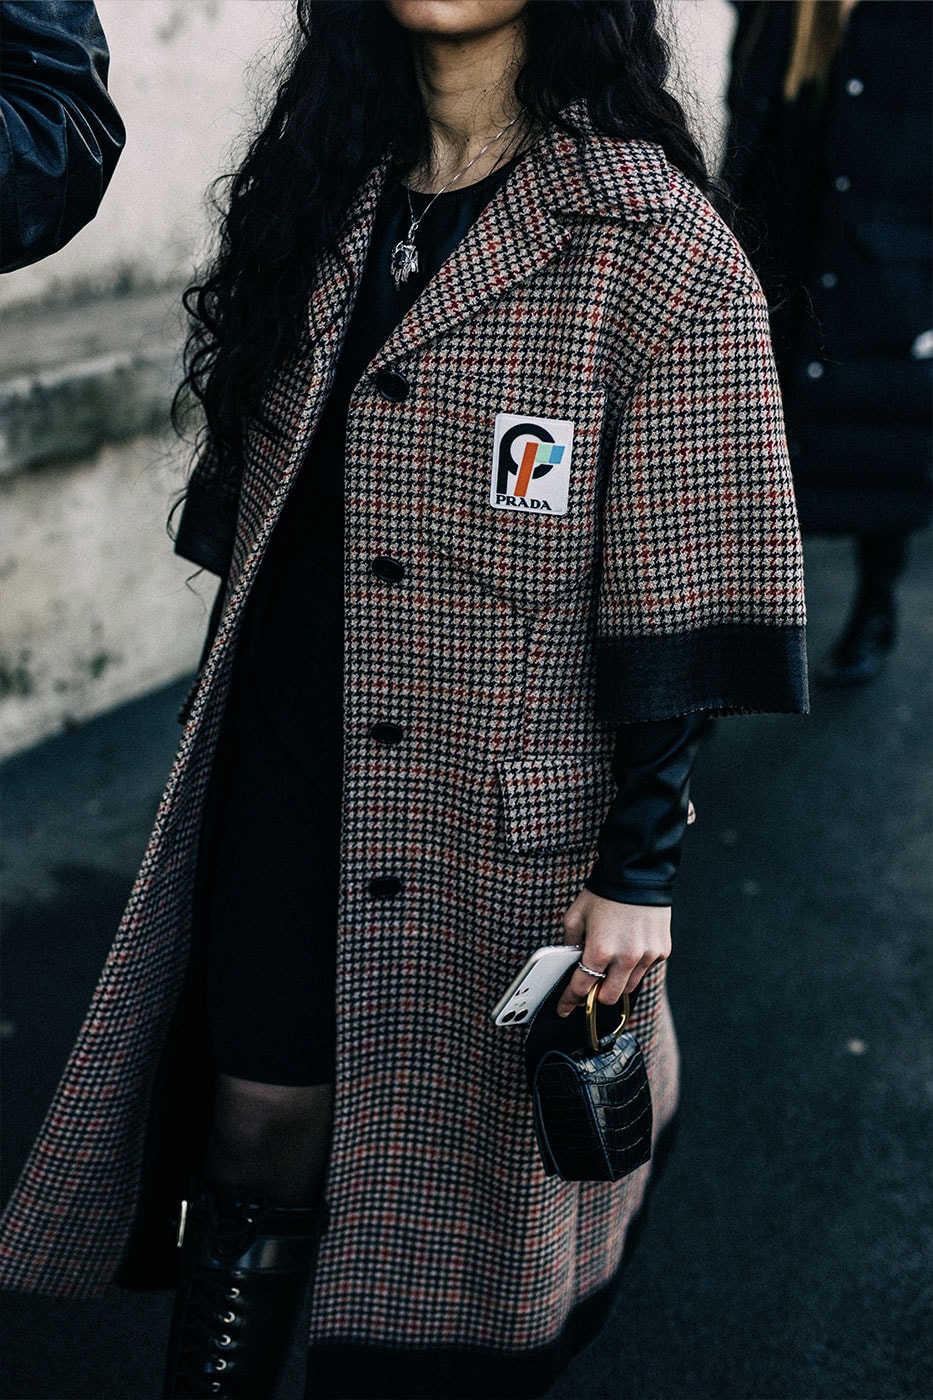 Milan Men's Fashion Week FW22 Street Style Served Coziness in Standout Patterns and Baggy Silhouettes fendi prada comme des garcons jw anderson